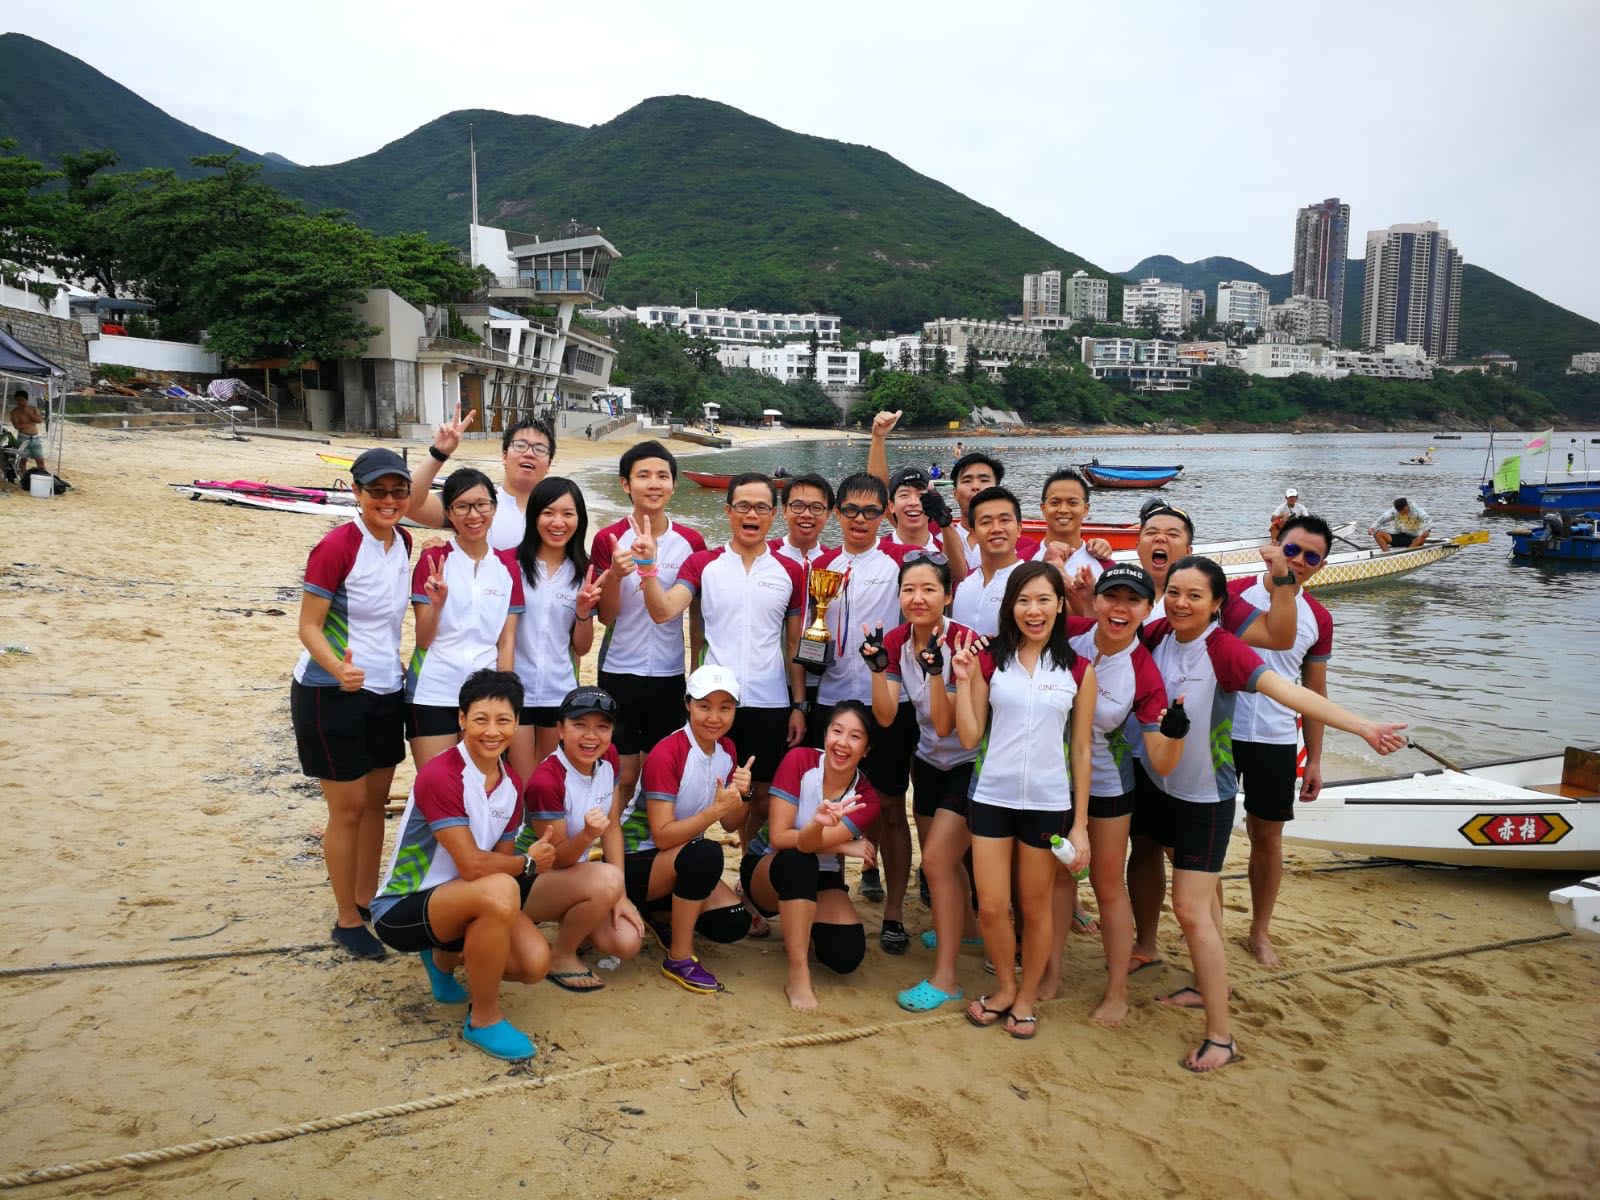 ONC Lawyers is first runner-up in the Silver Cup in the Legal Professional Cup Dragon Boat Race 2018